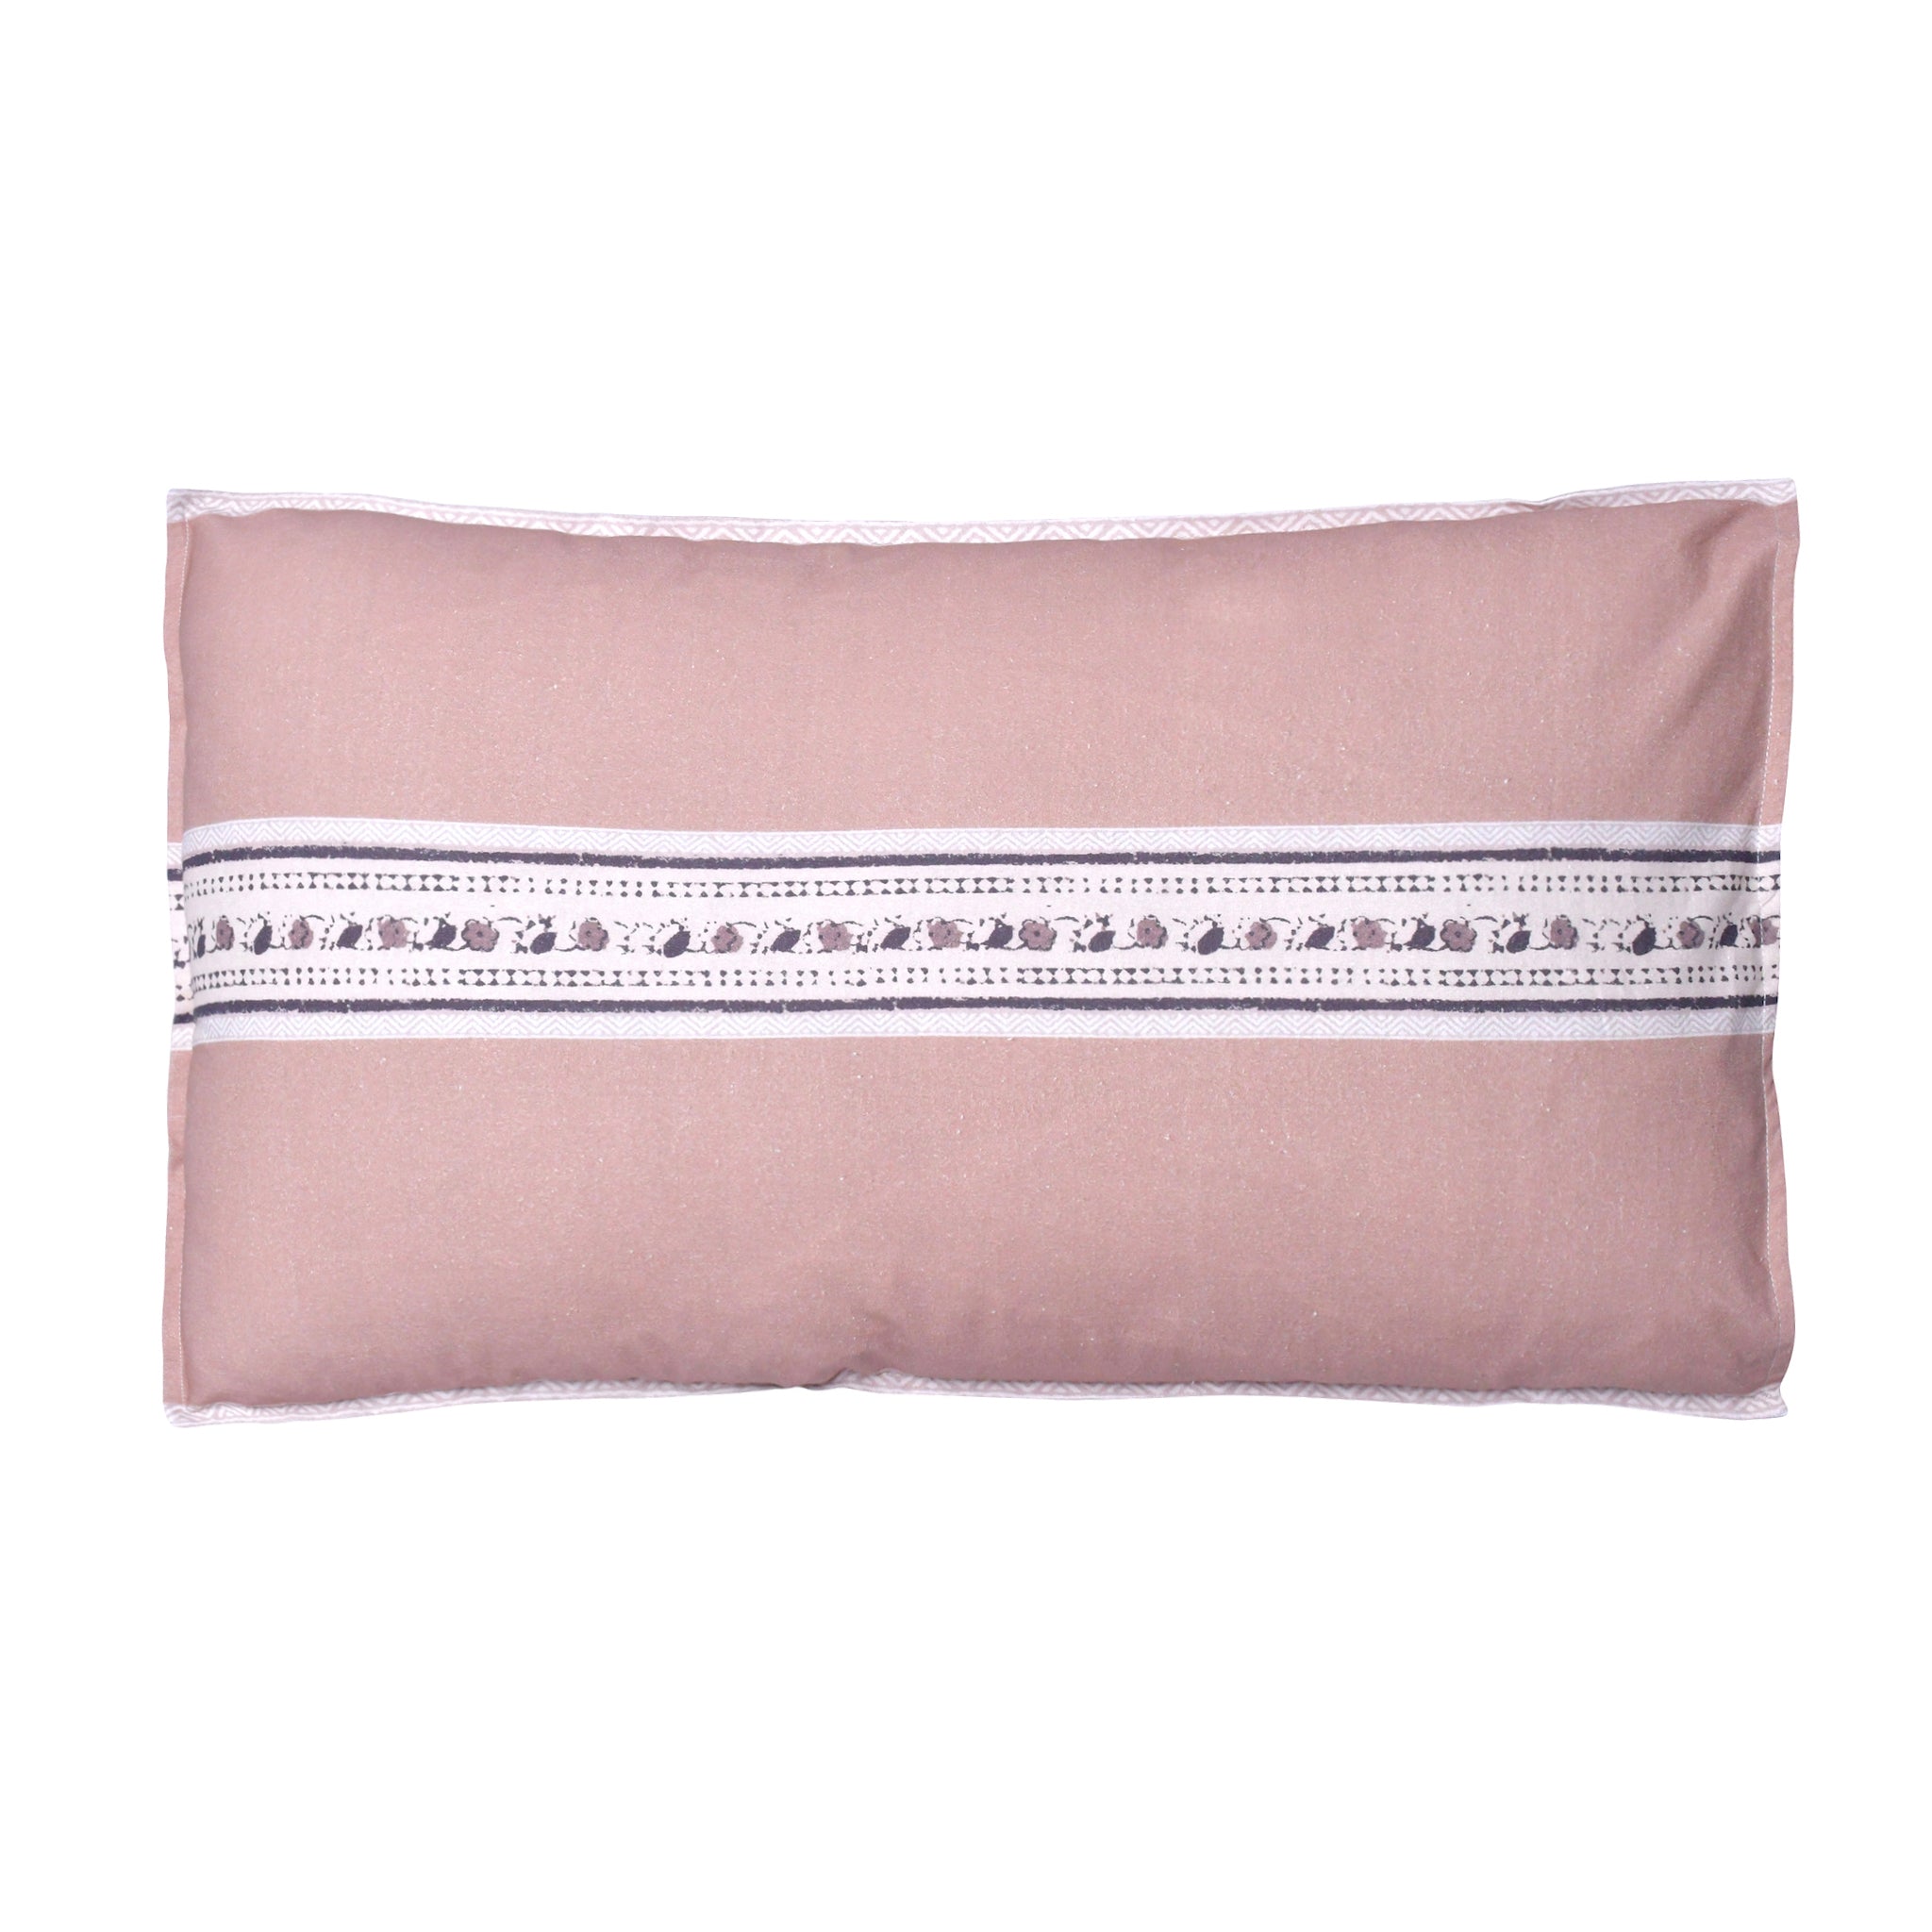 Pillow Cover - Patta and Salli Taupe